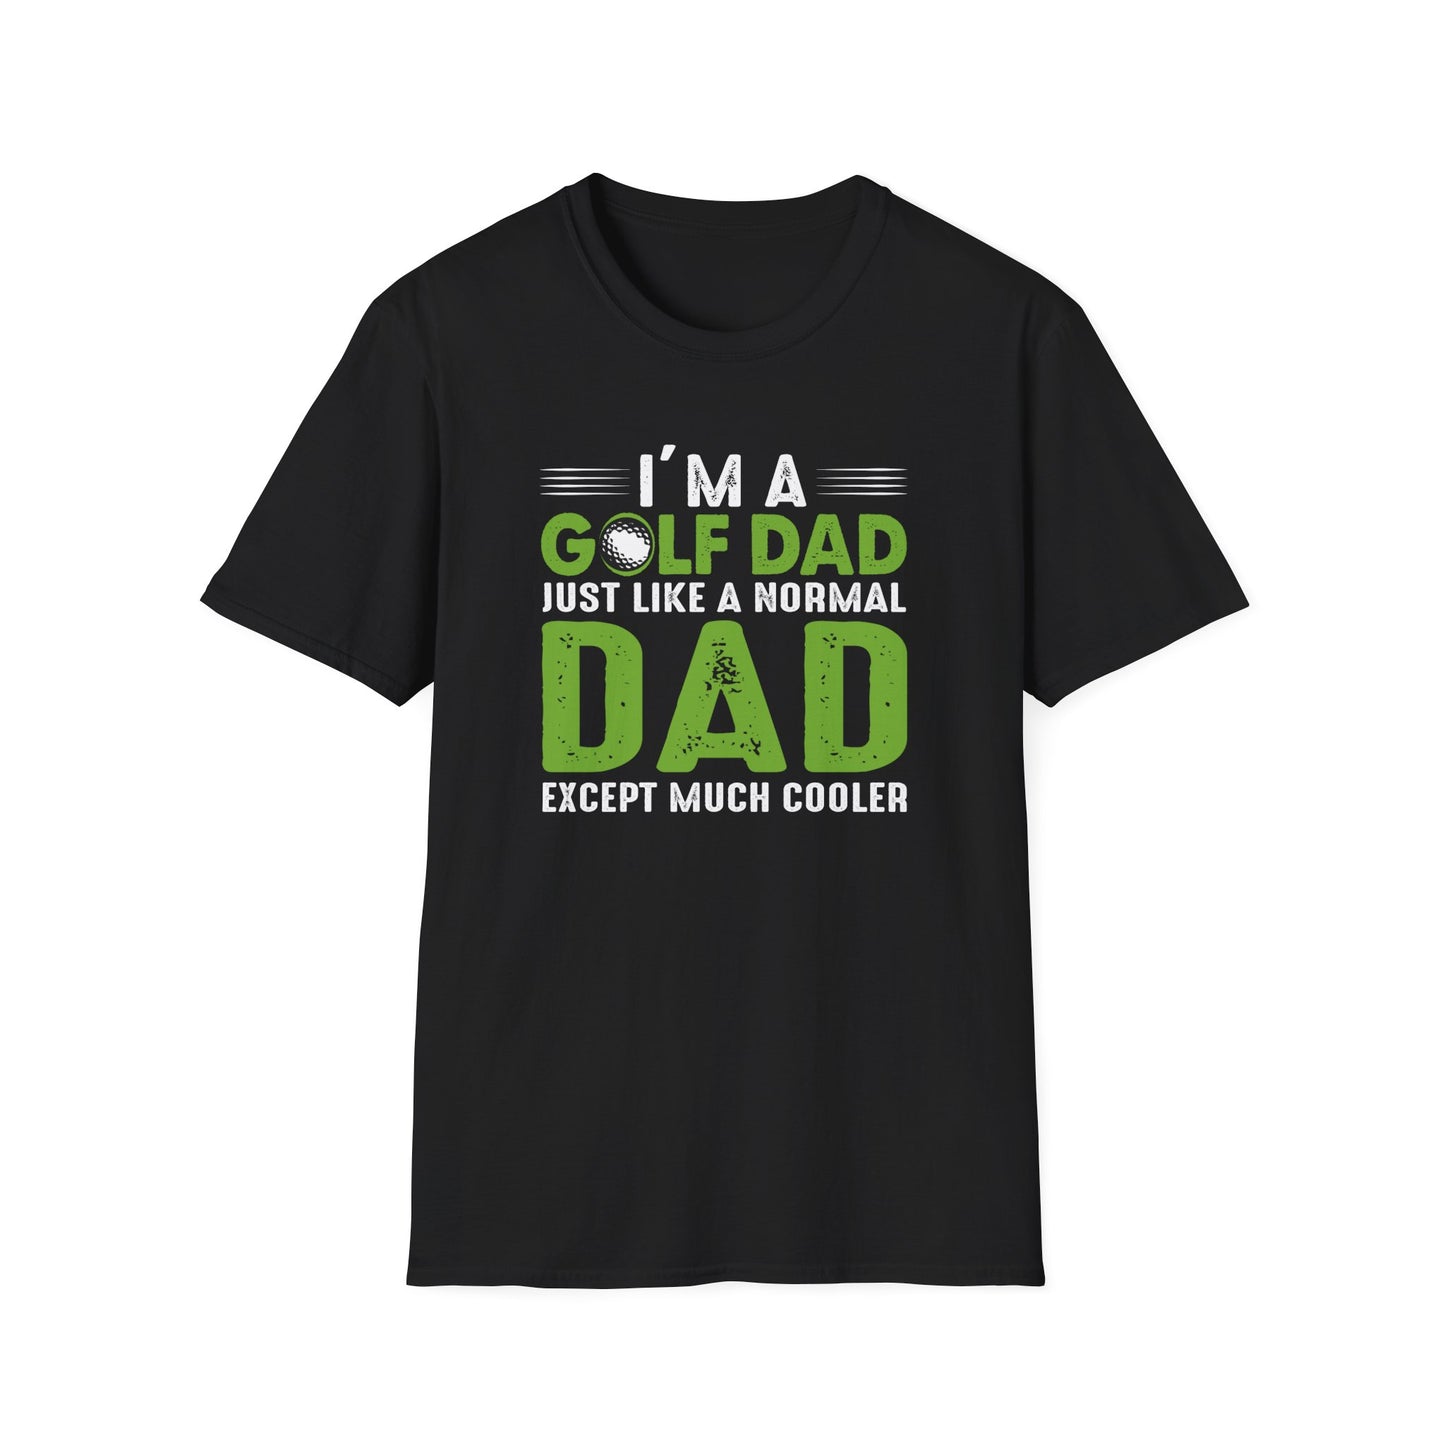 Cool Golf Dad Tee: Embrace Your Swing with Style